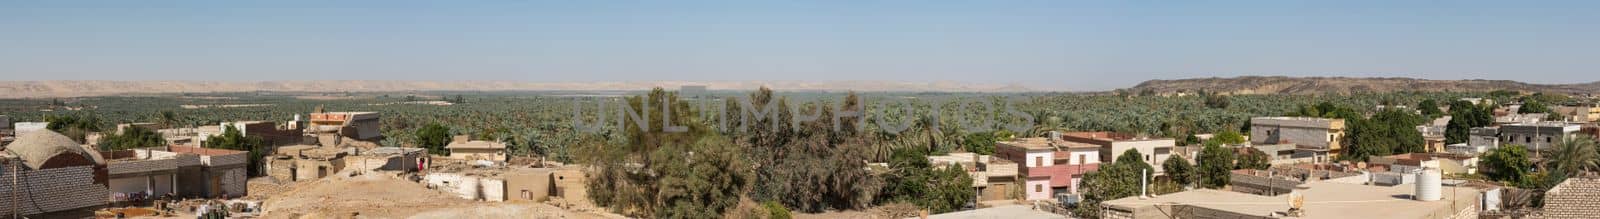 Panoramic view over remote african town with oasis by paulvinten